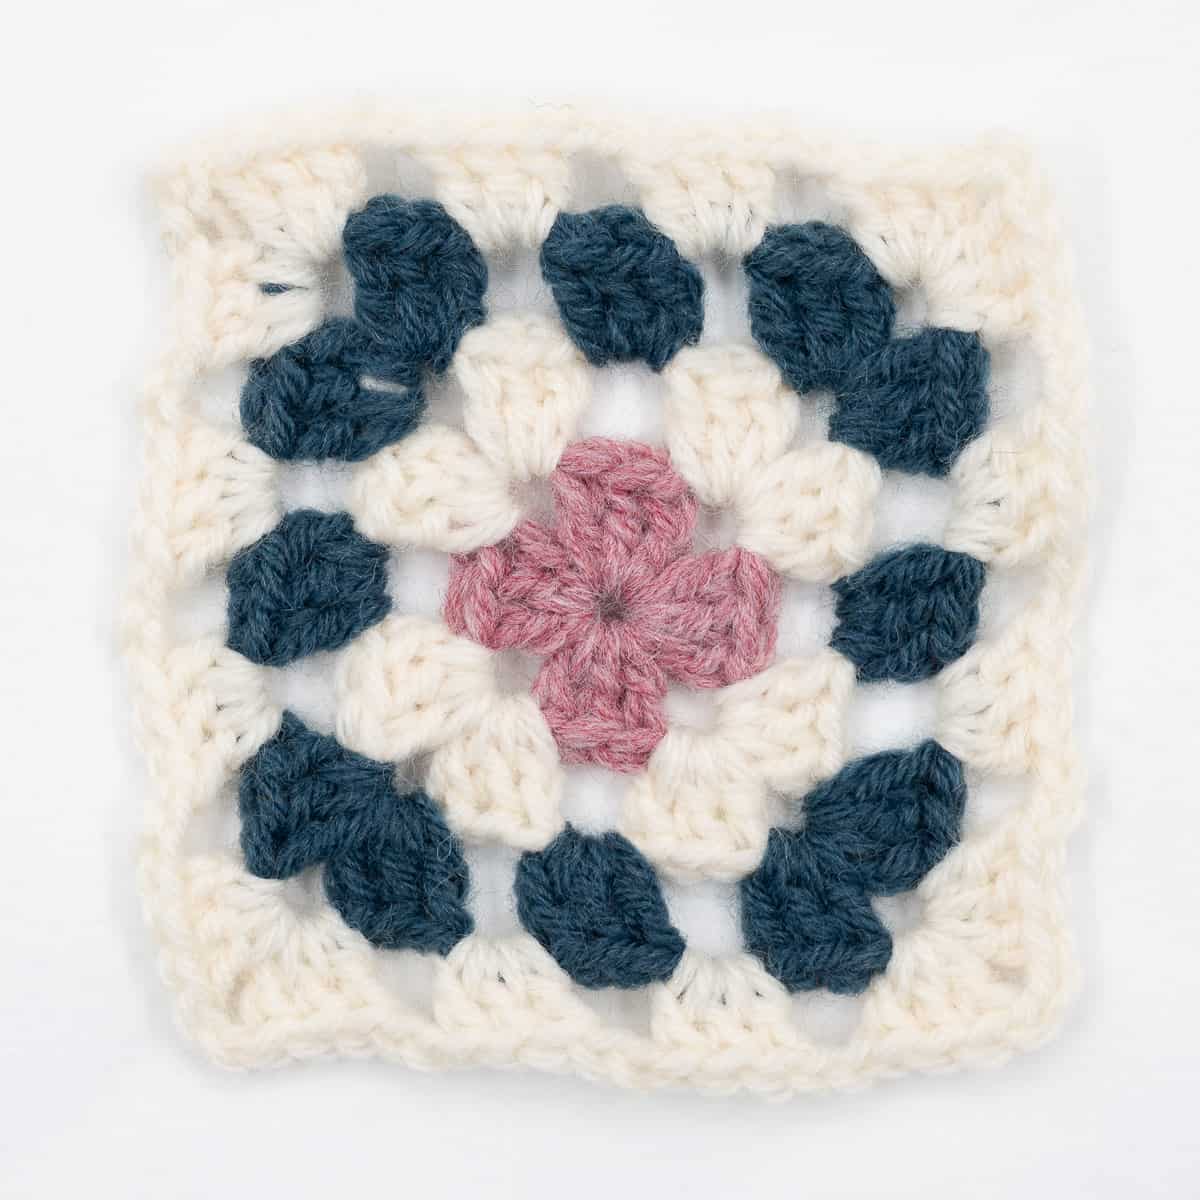 A crocheted granny square in white, blue and pink.